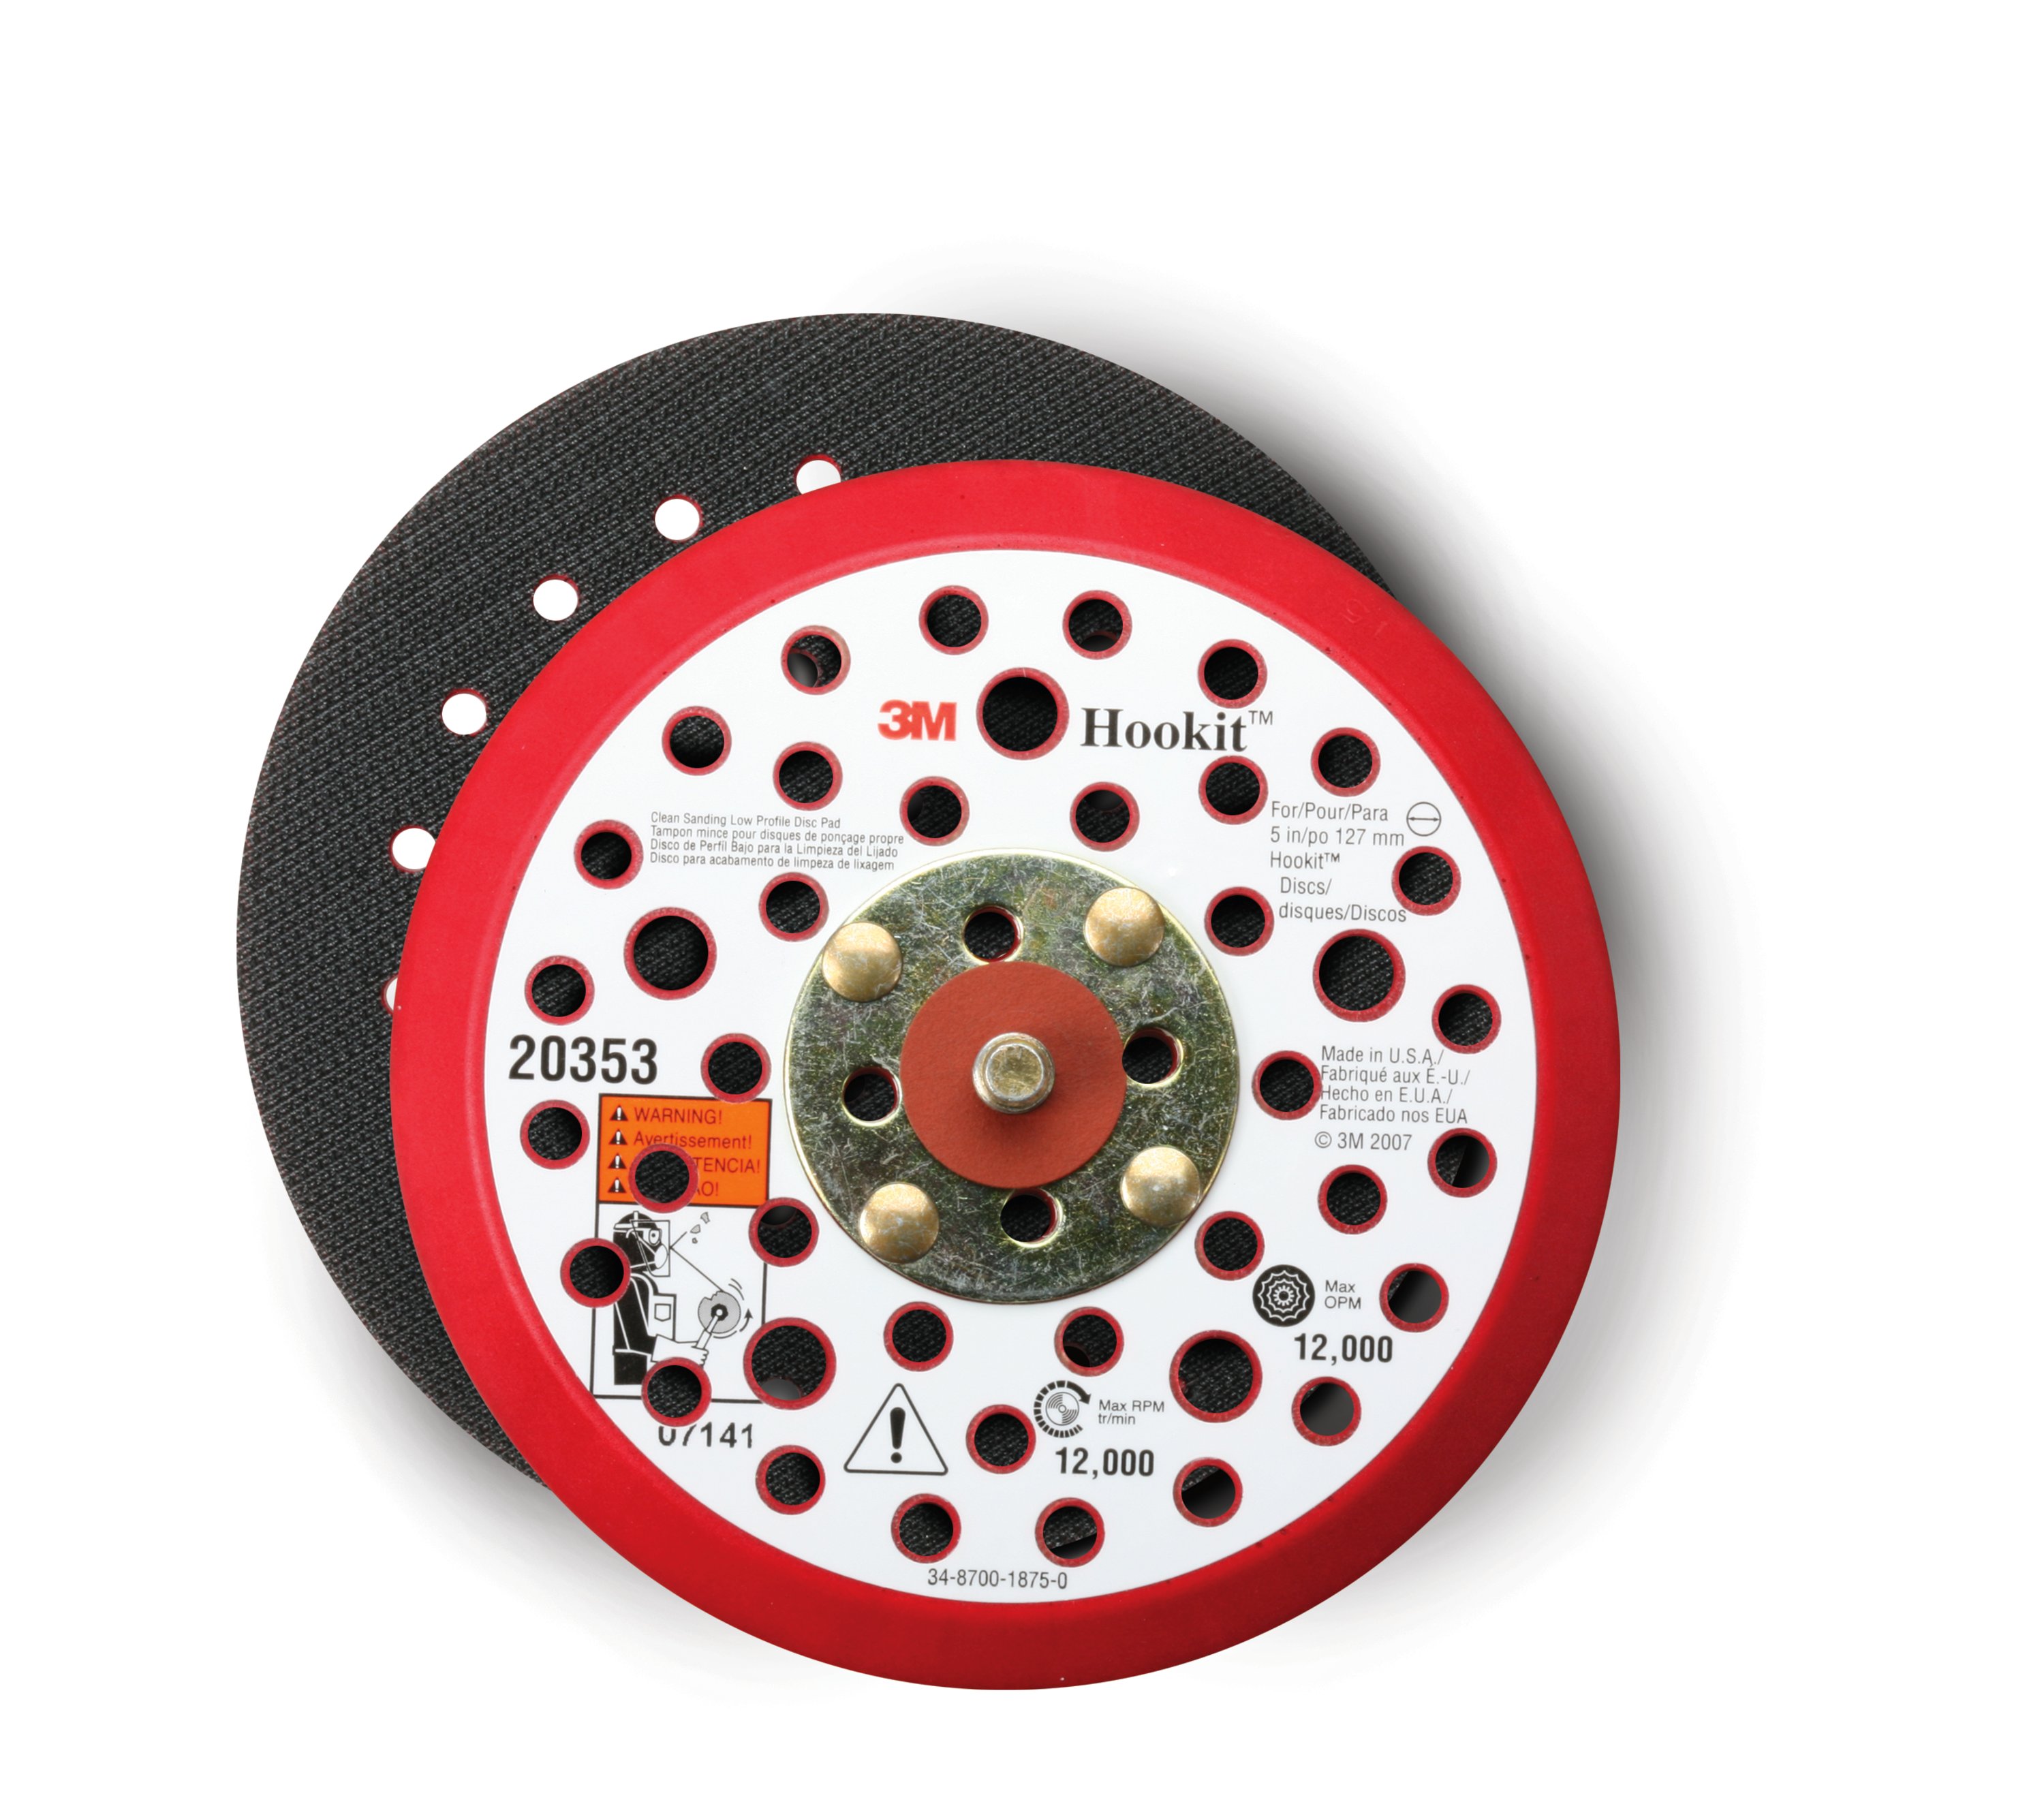 The lightweight, shock-resistant 3M™ Hookit™ Low Profile Disc Pad holds a 3M™ Hookit™ Disc (sold separately) on a random orbital sander or other rotary tool.